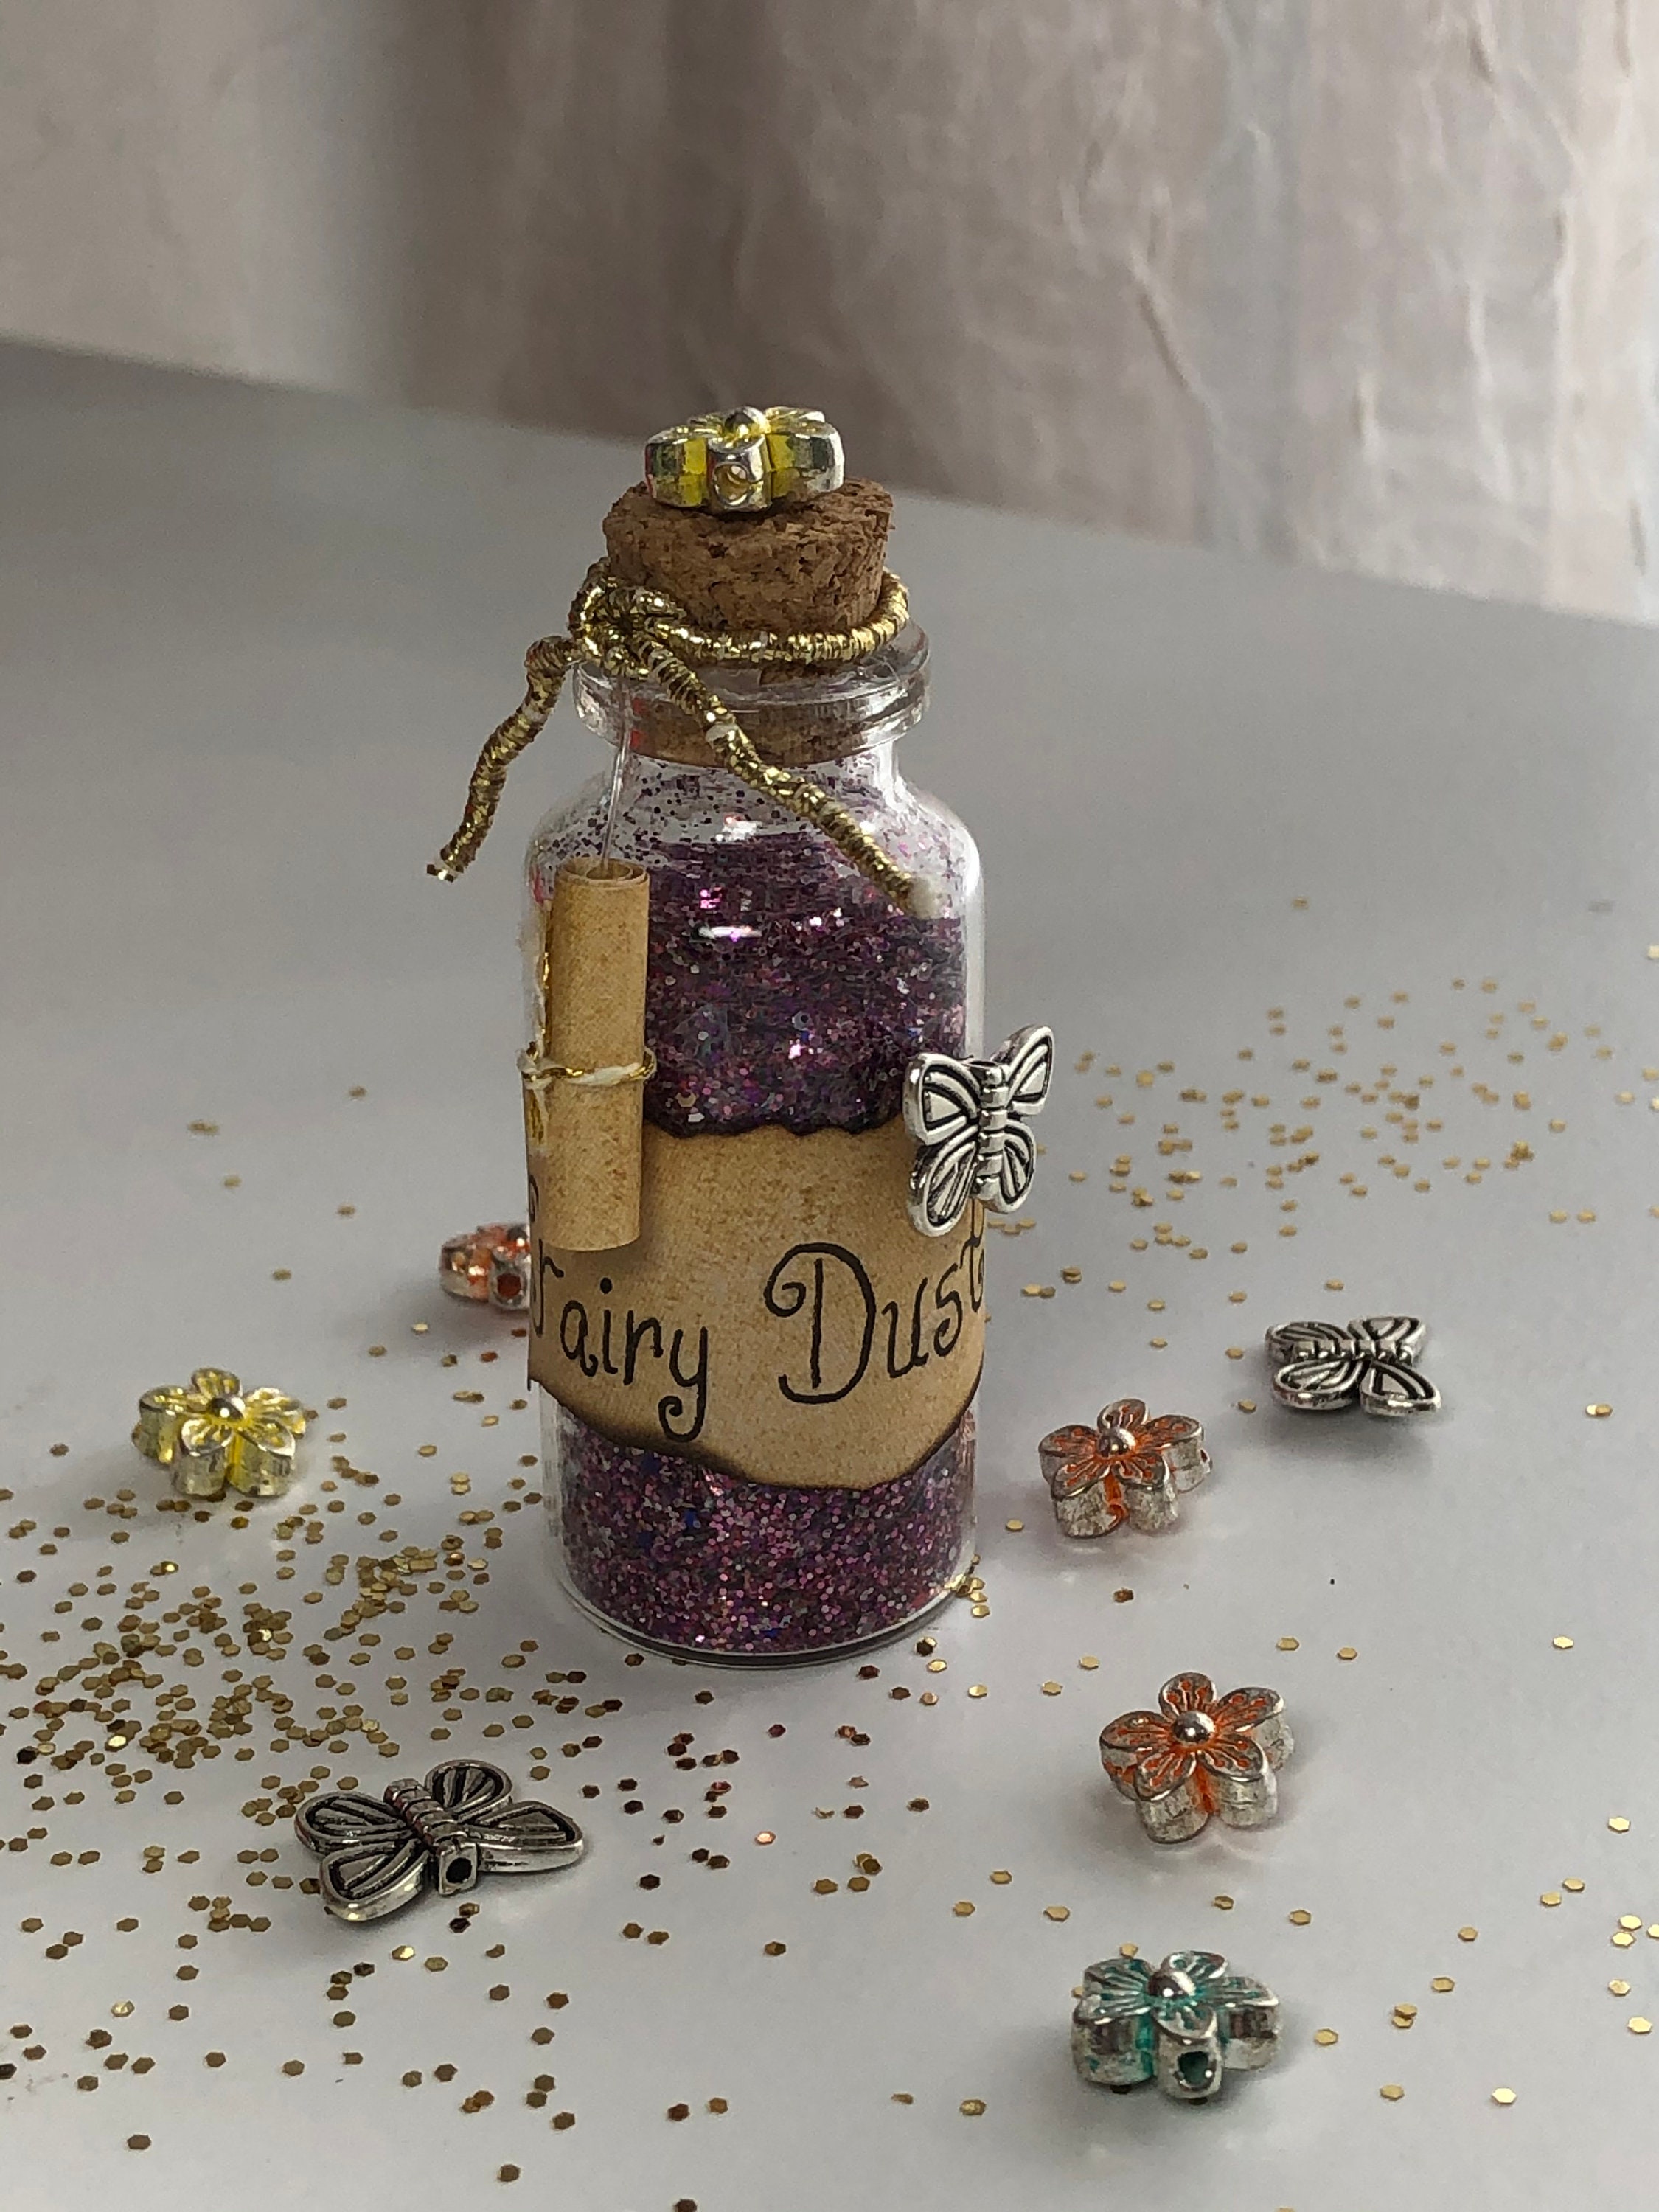 Bottled Fairy Dust, Pixie Dust, Magical Gifts, Fairy Gifts